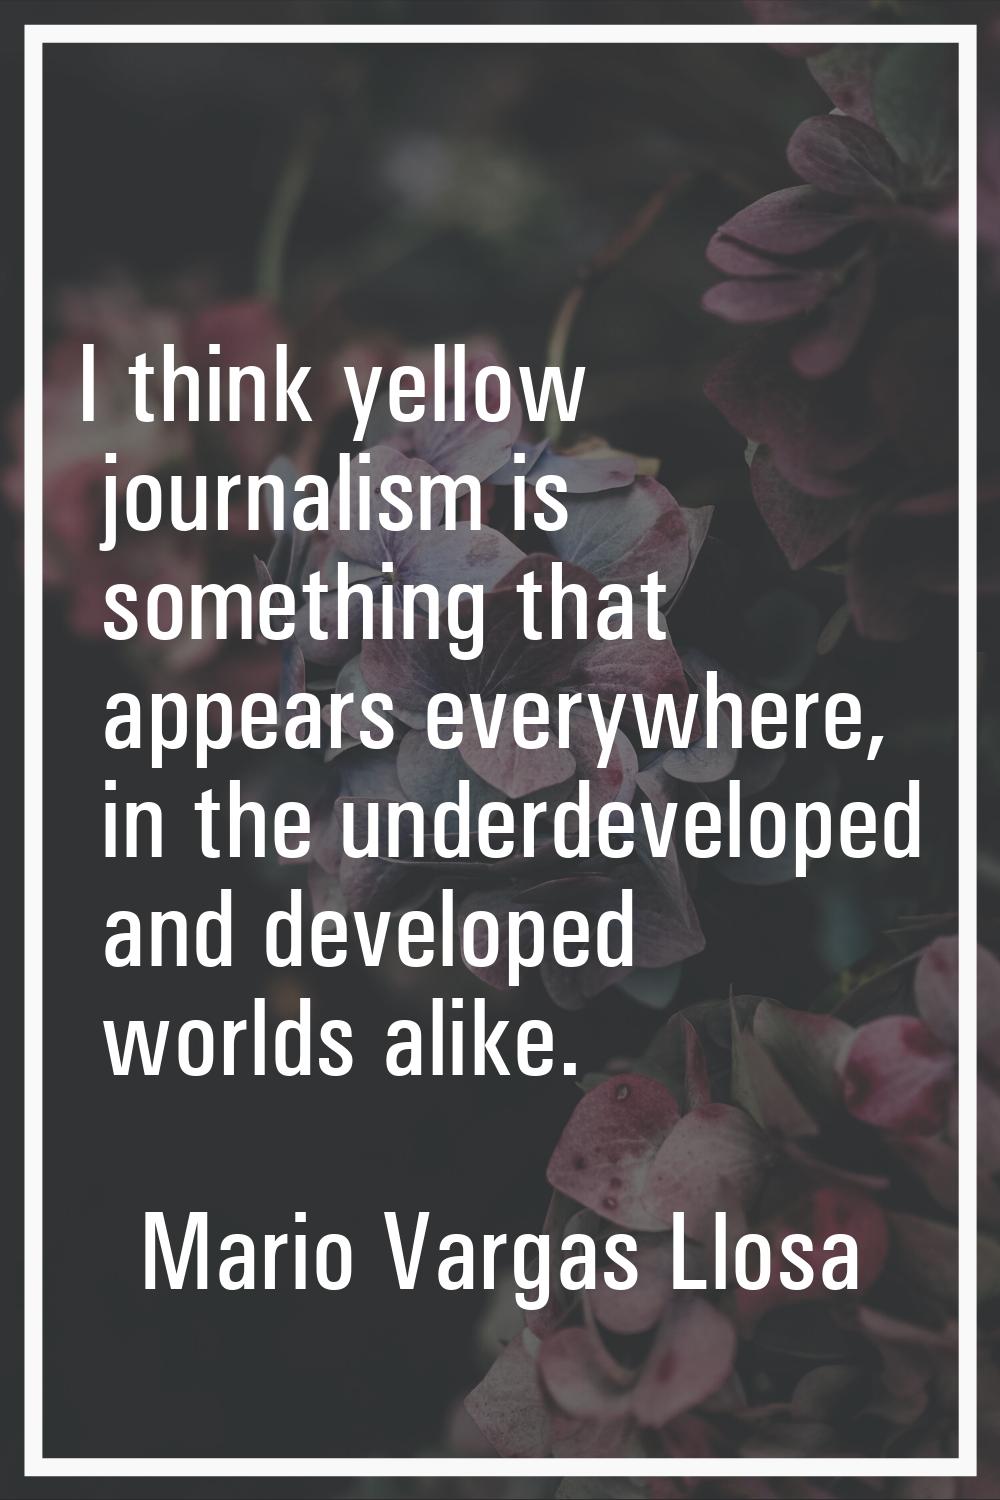 I think yellow journalism is something that appears everywhere, in the underdeveloped and developed